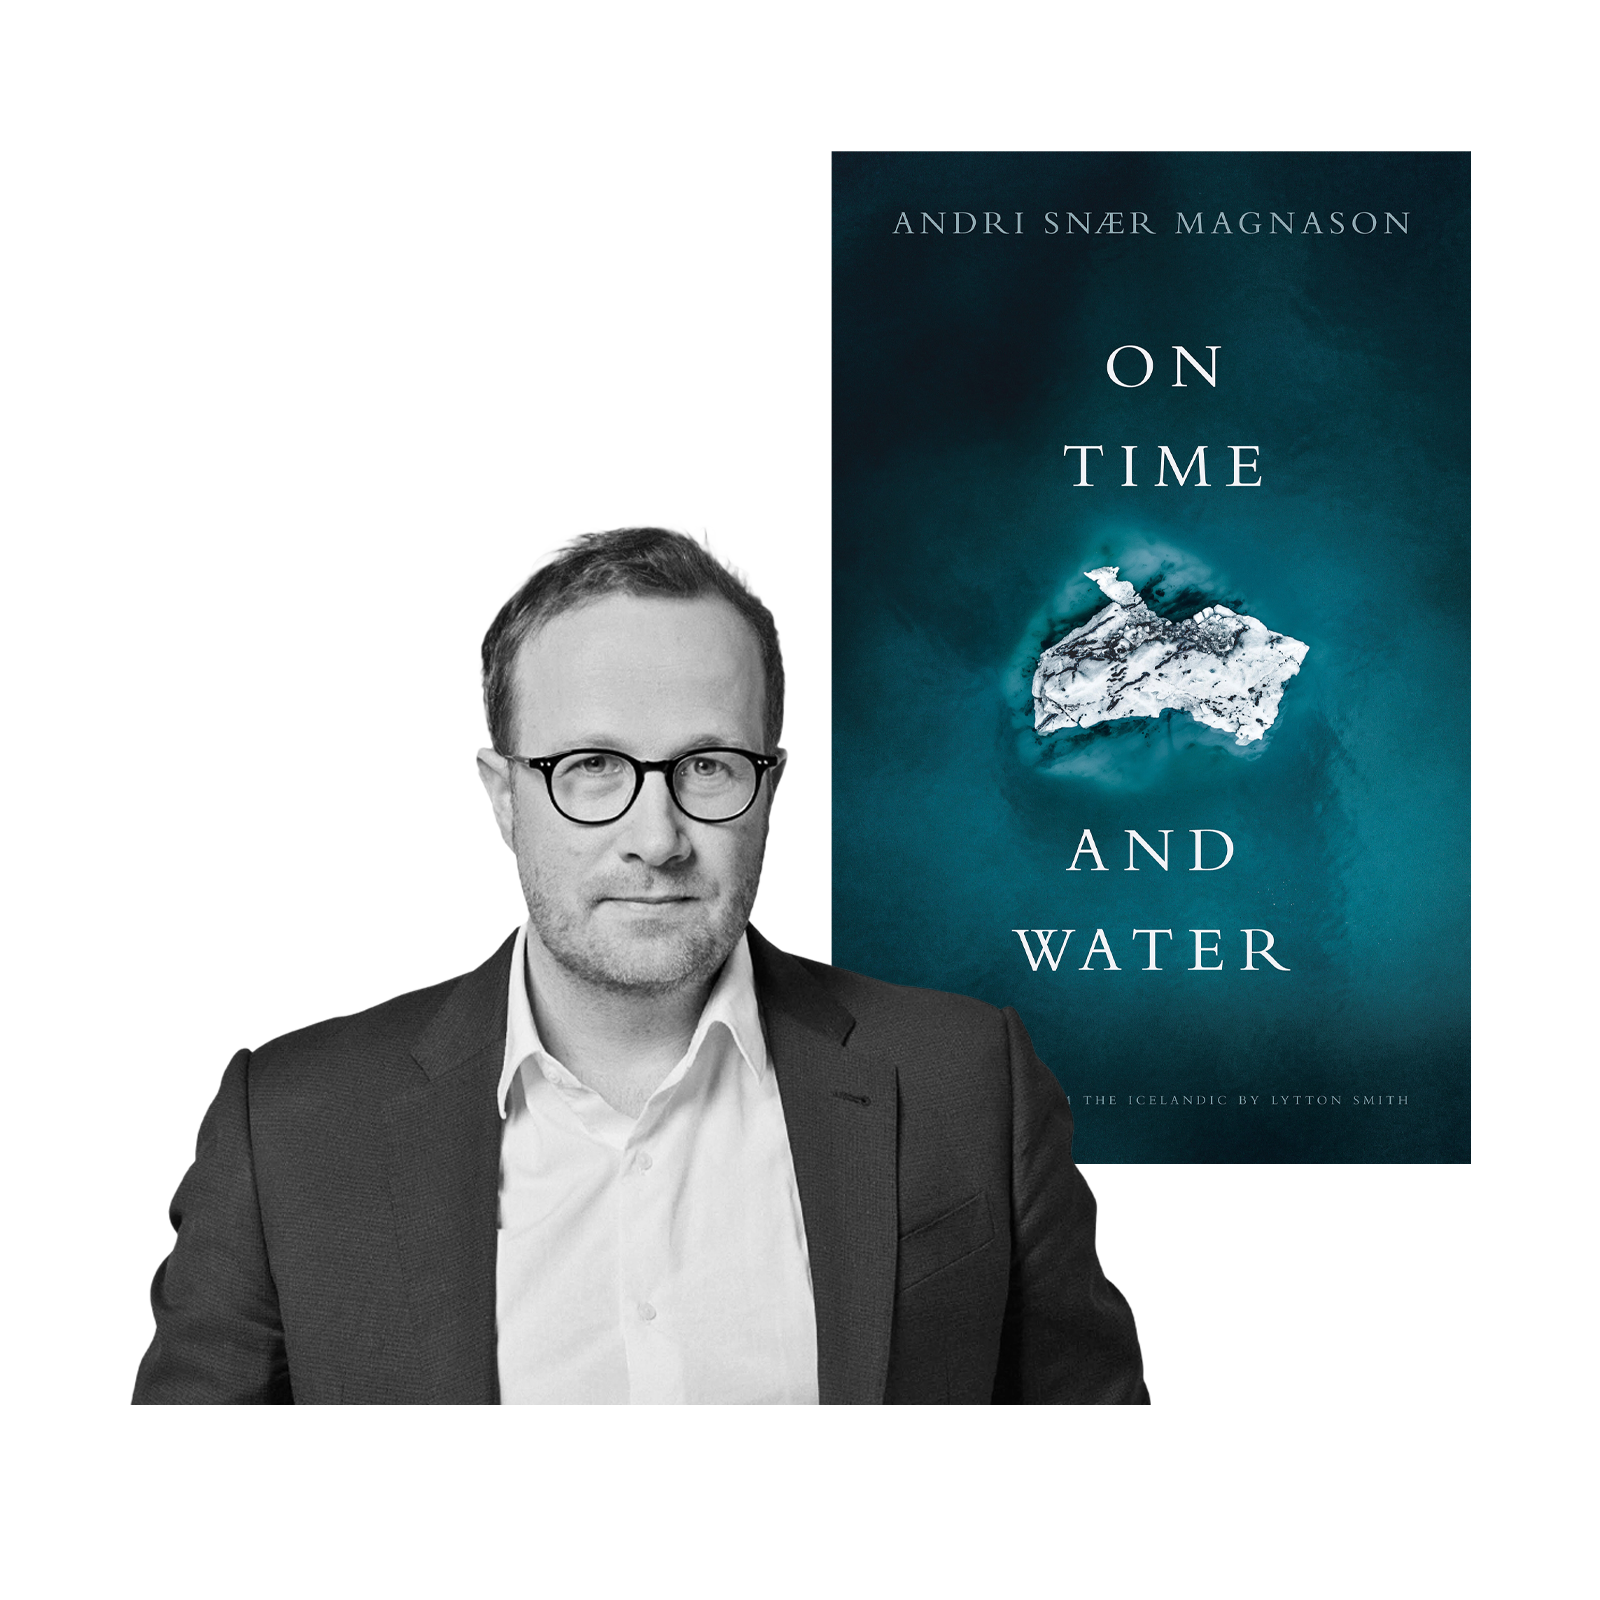 A photo of Andri Snær Magnason and the cover of his book, 